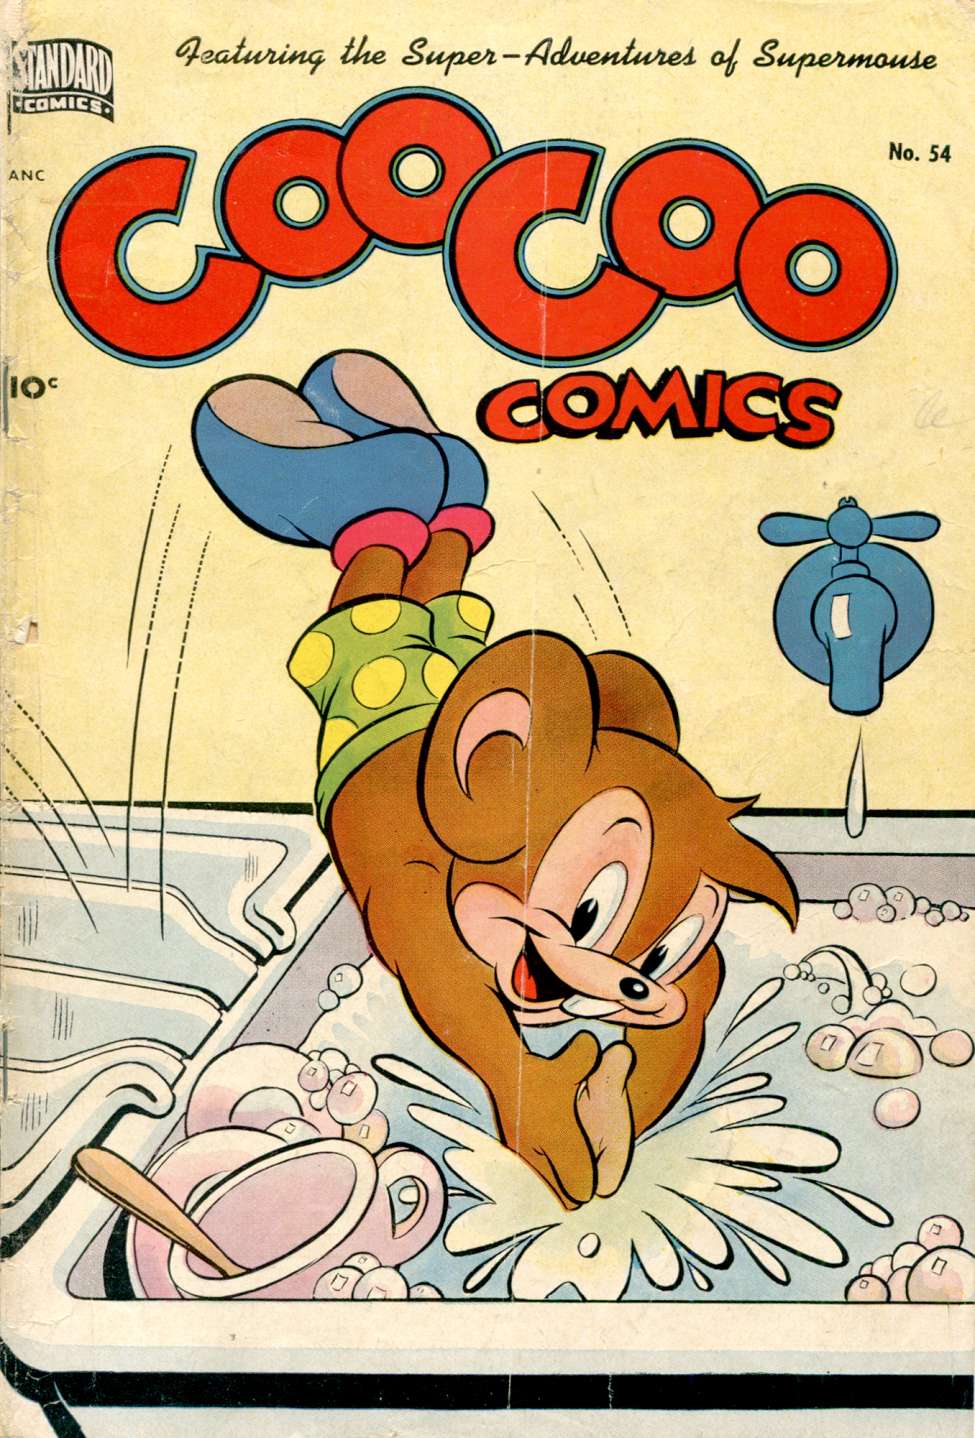 Book Cover For Coo Coo Comics 54 - Version 1